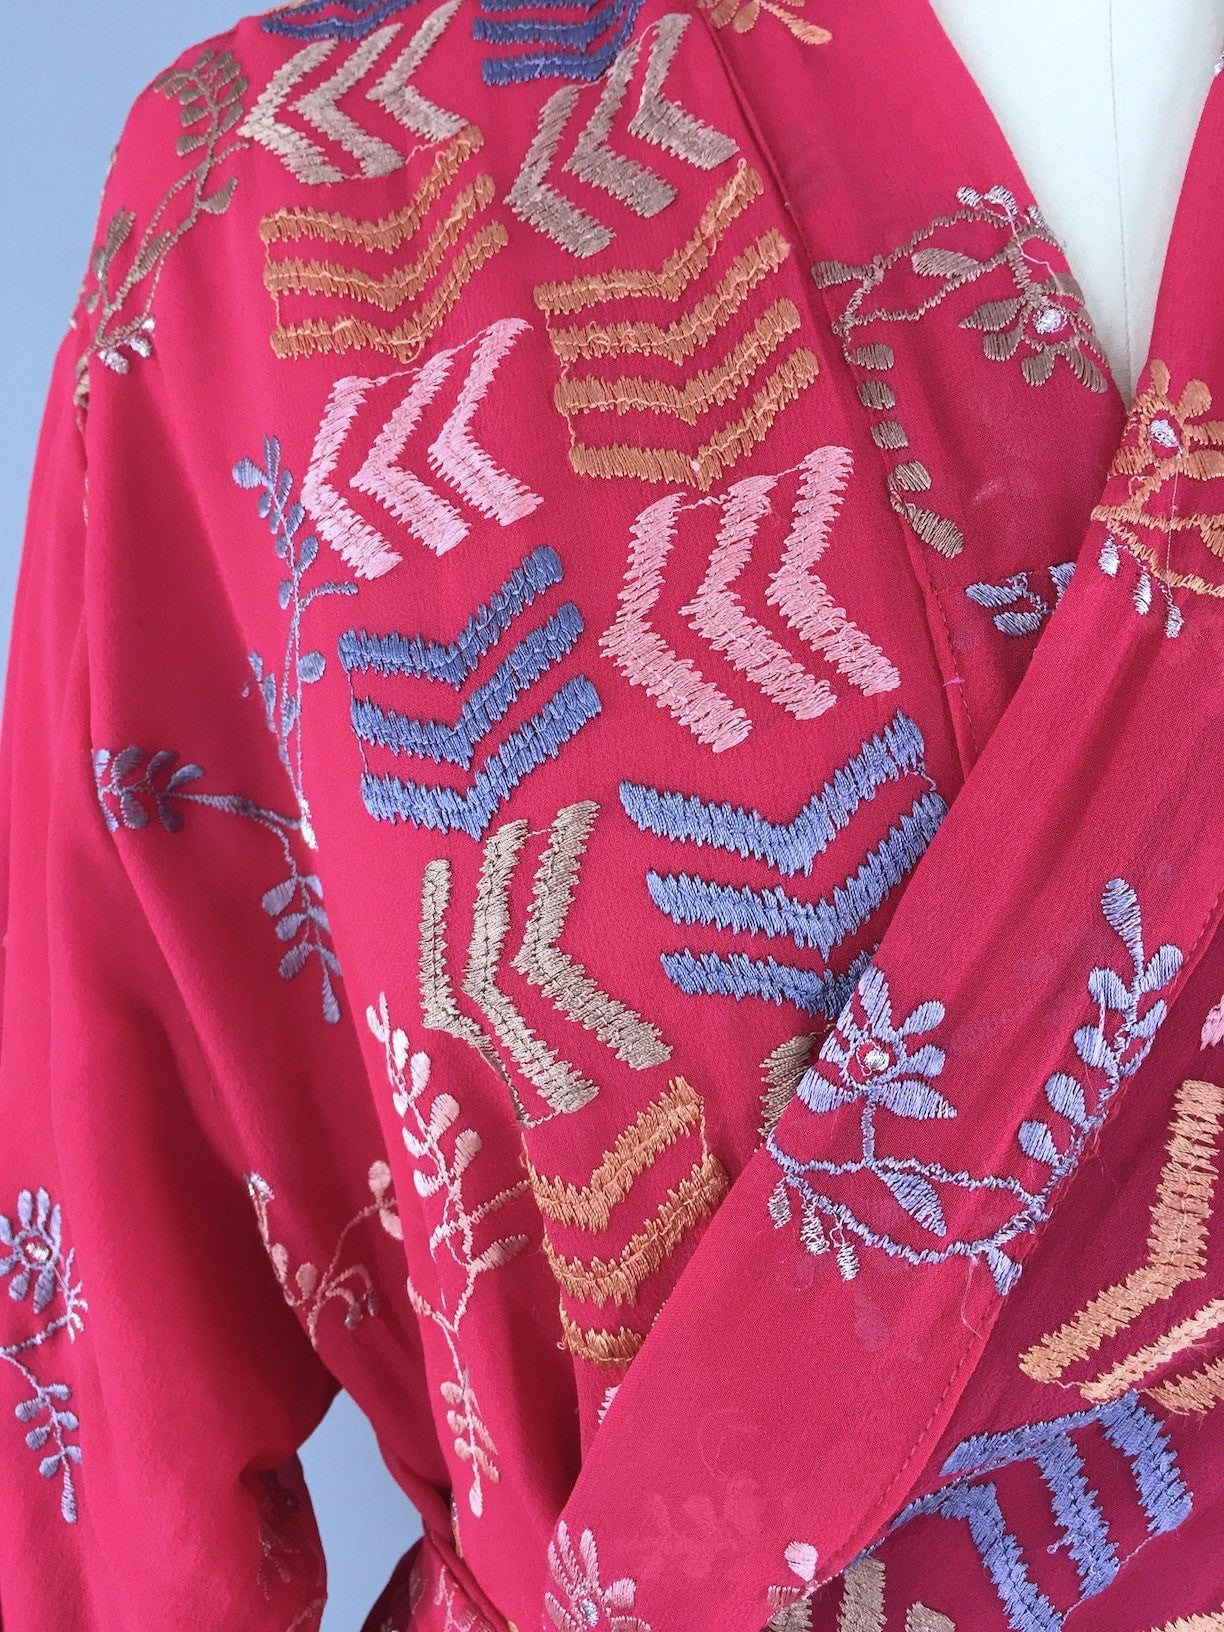 Silk Chiffon Kimono Cardigan made from a Vintage Indian Sari with Red Chevron Embroidery - ThisBlueBird